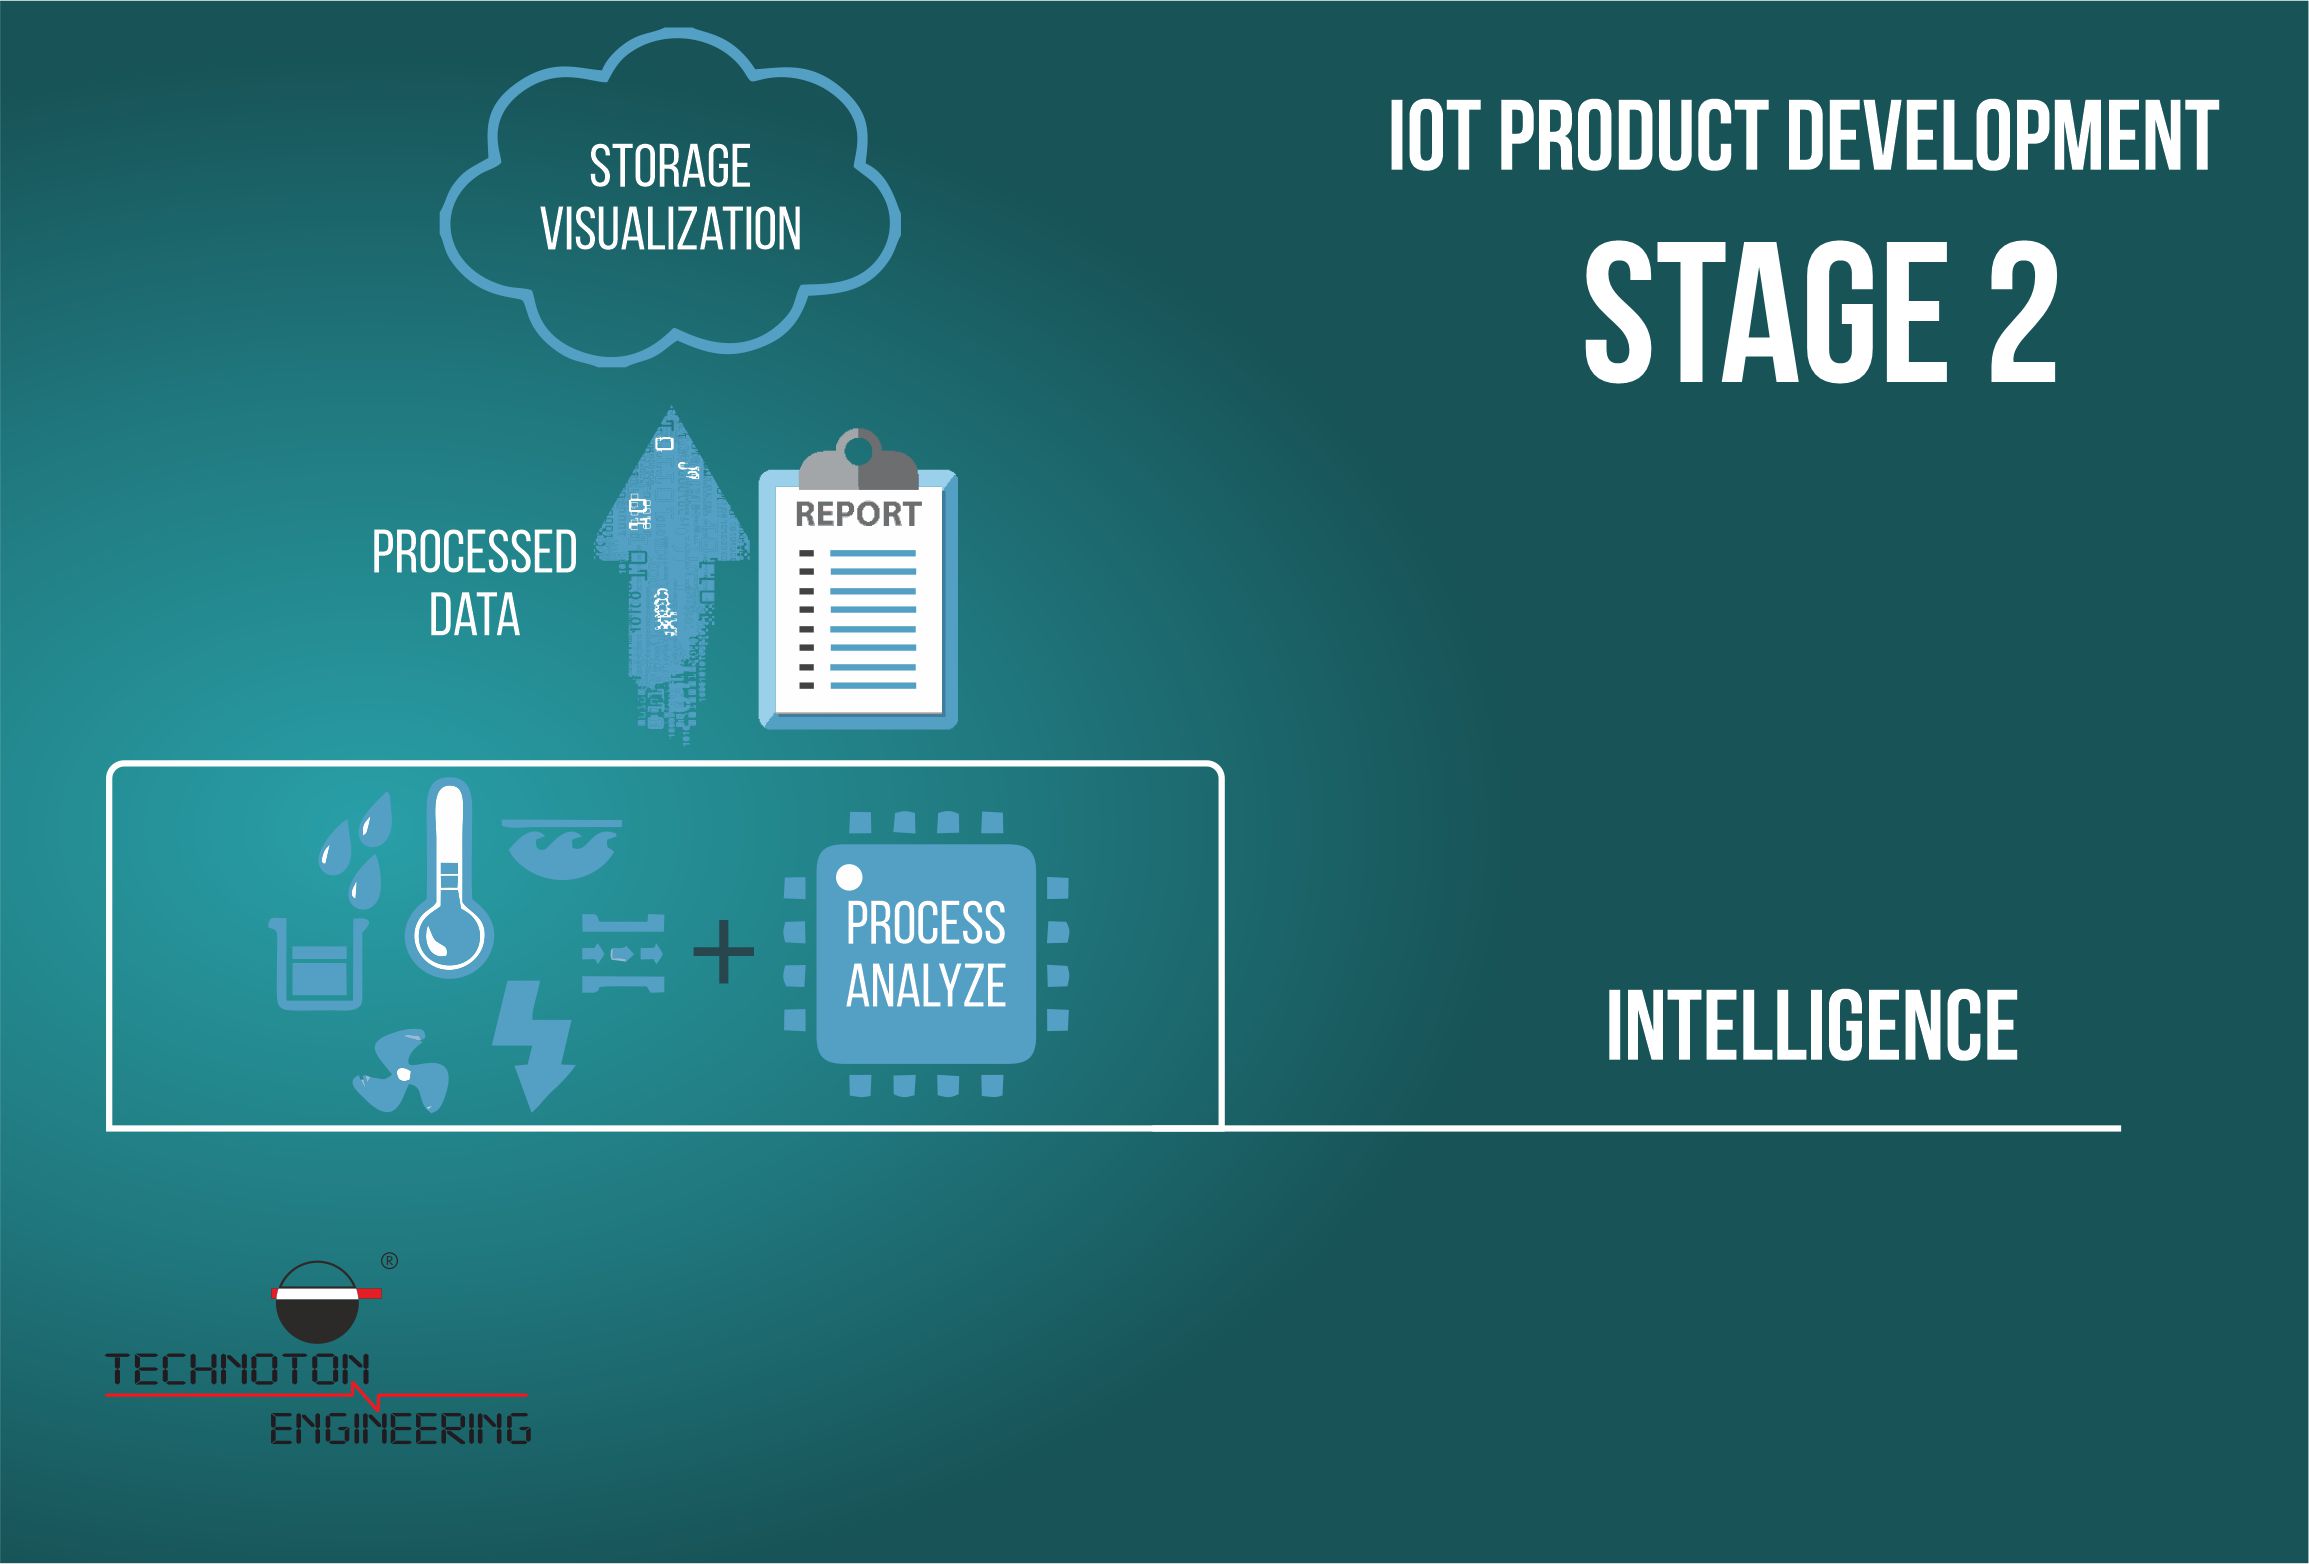 Adding intelligence inside IoT product at development stage